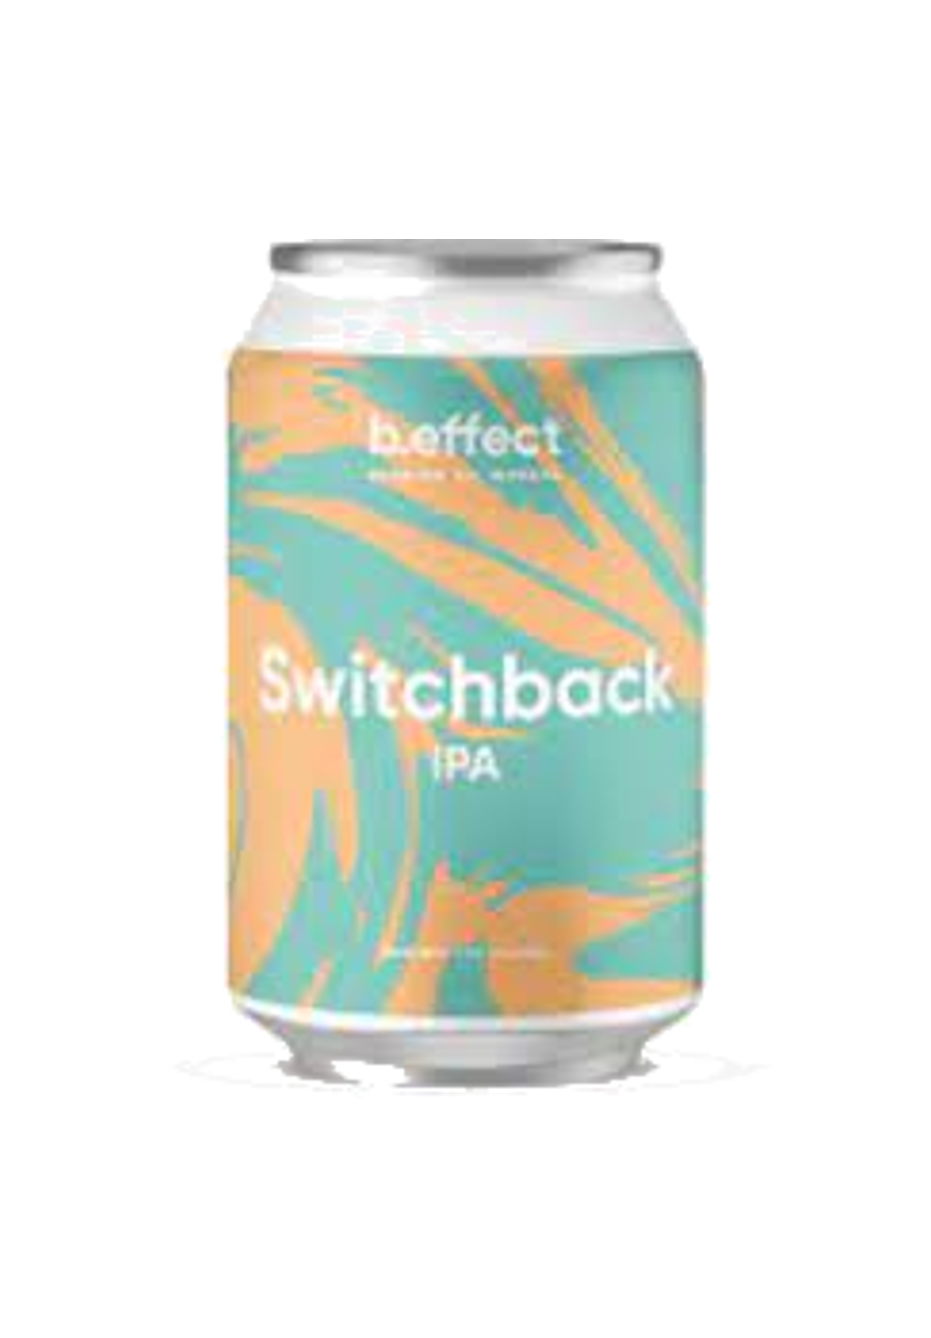 b.effect Switchback IPA (330ml cans)